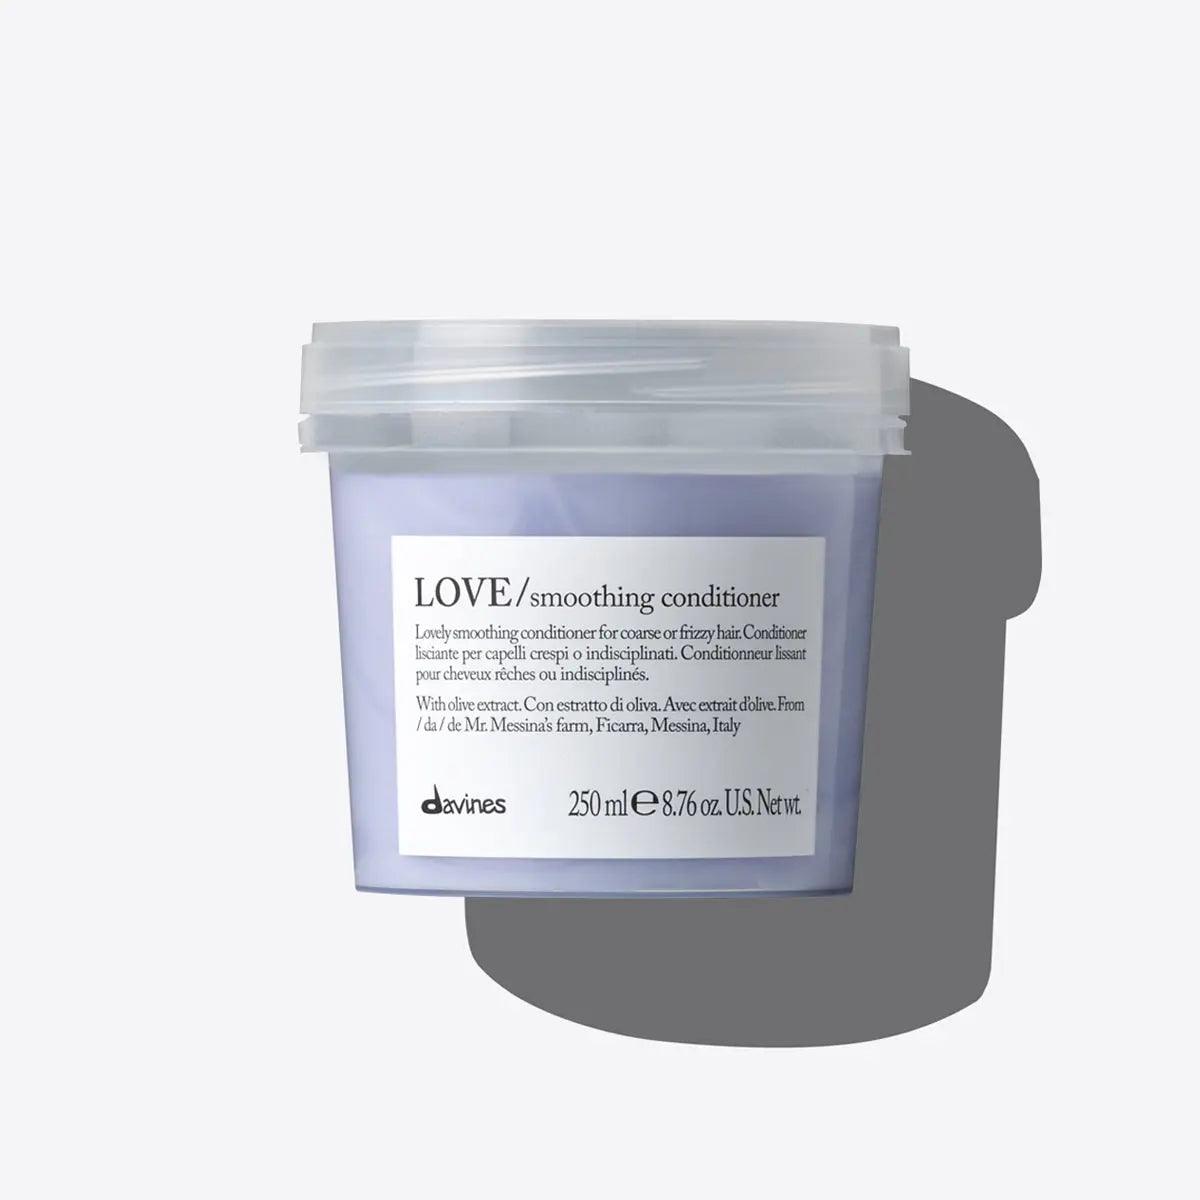 LOVE SMOOTHING CONDITIONER Davines Boutique Deauville